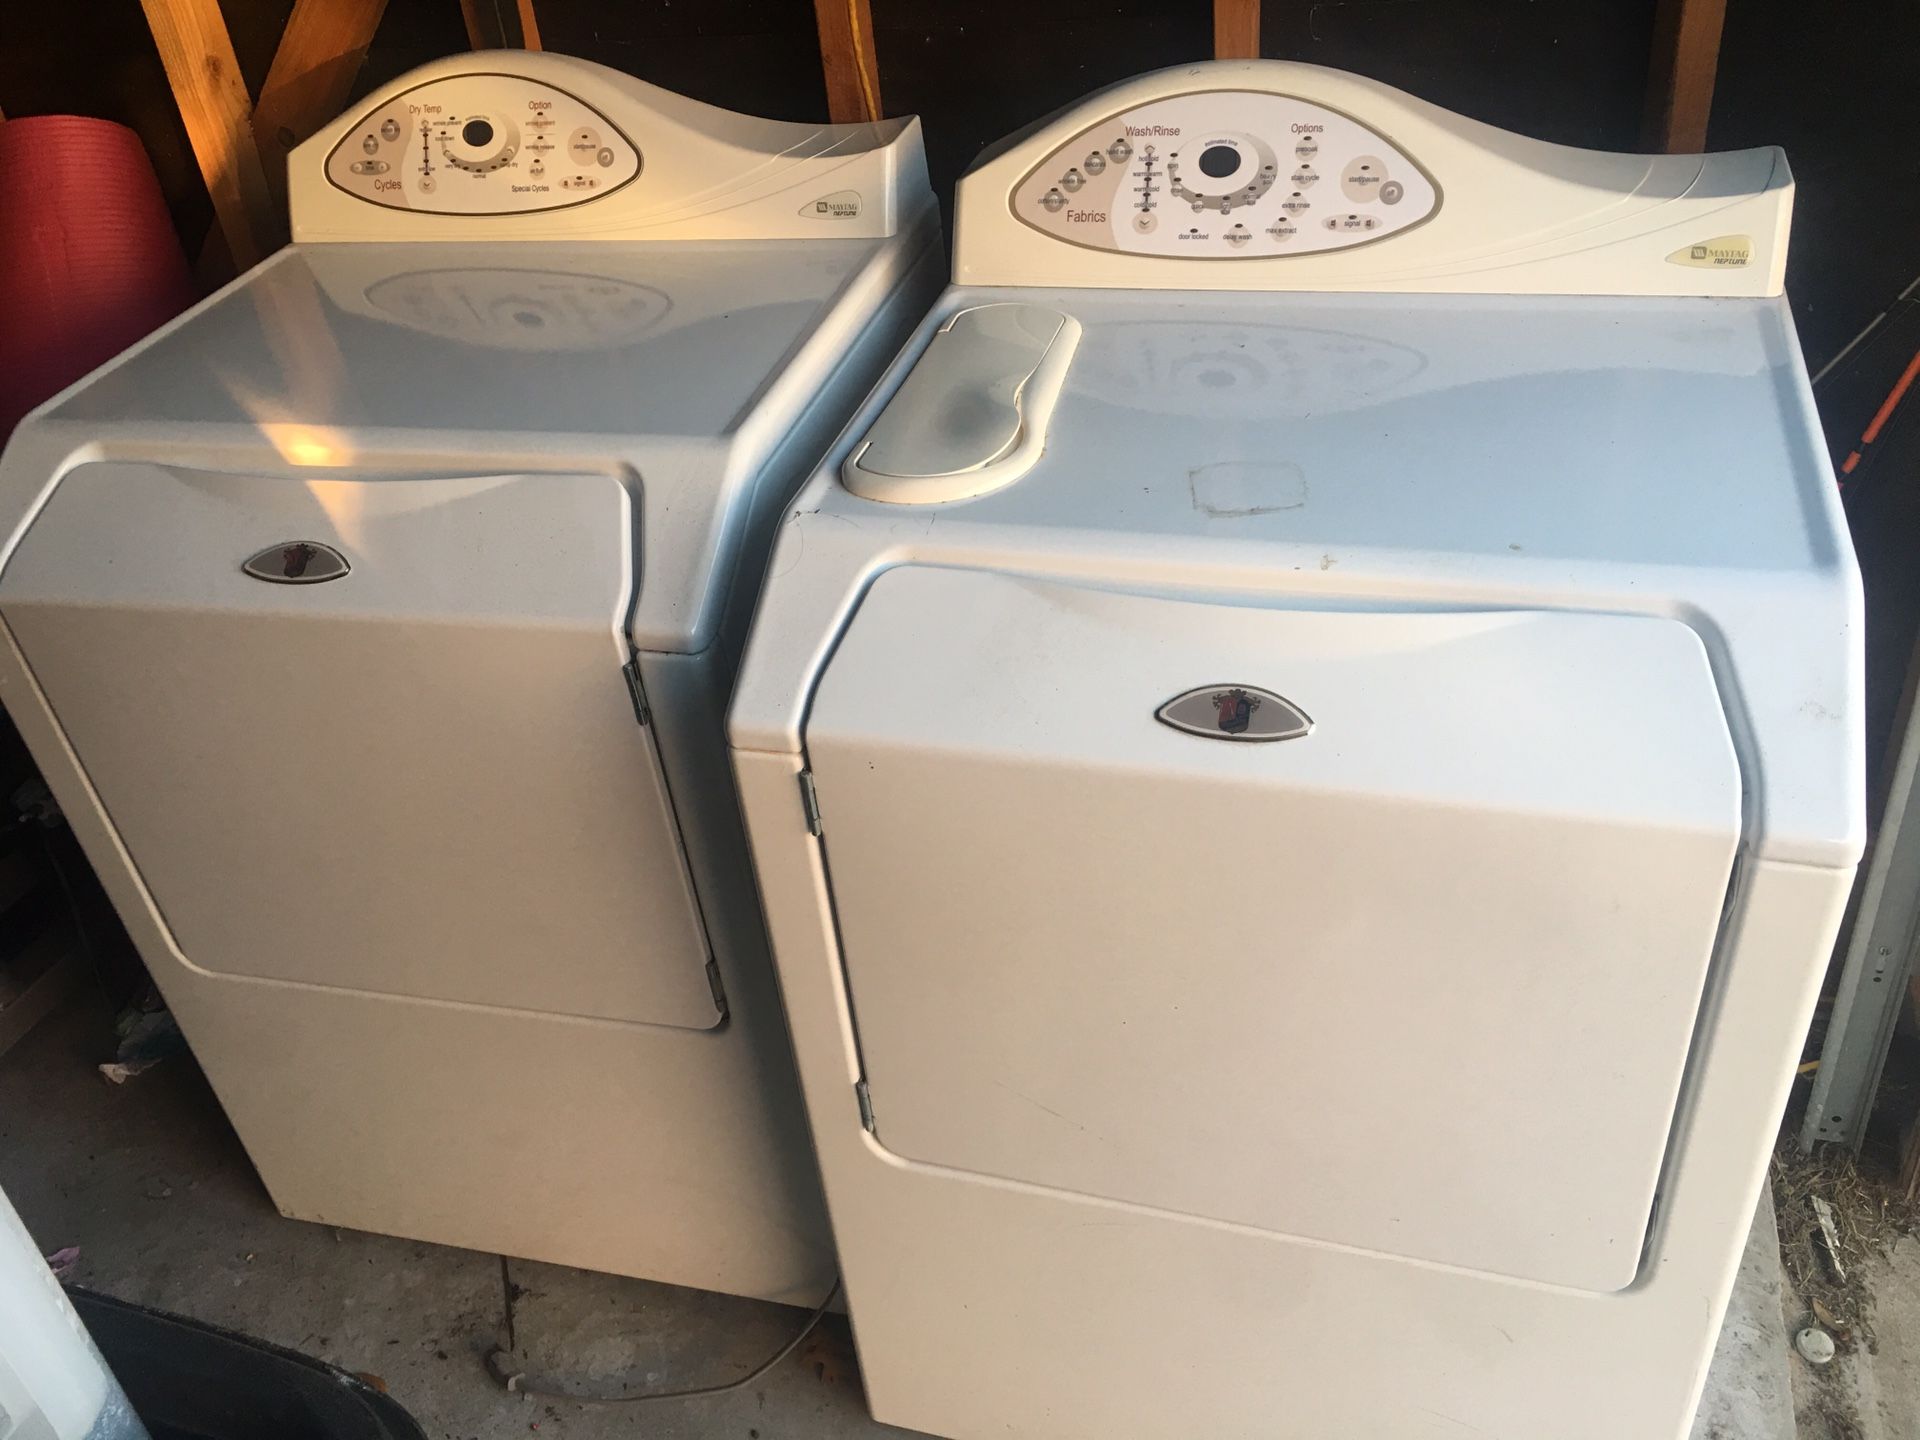 Maytag Washer and Electric Dryer - Pending Pick Up